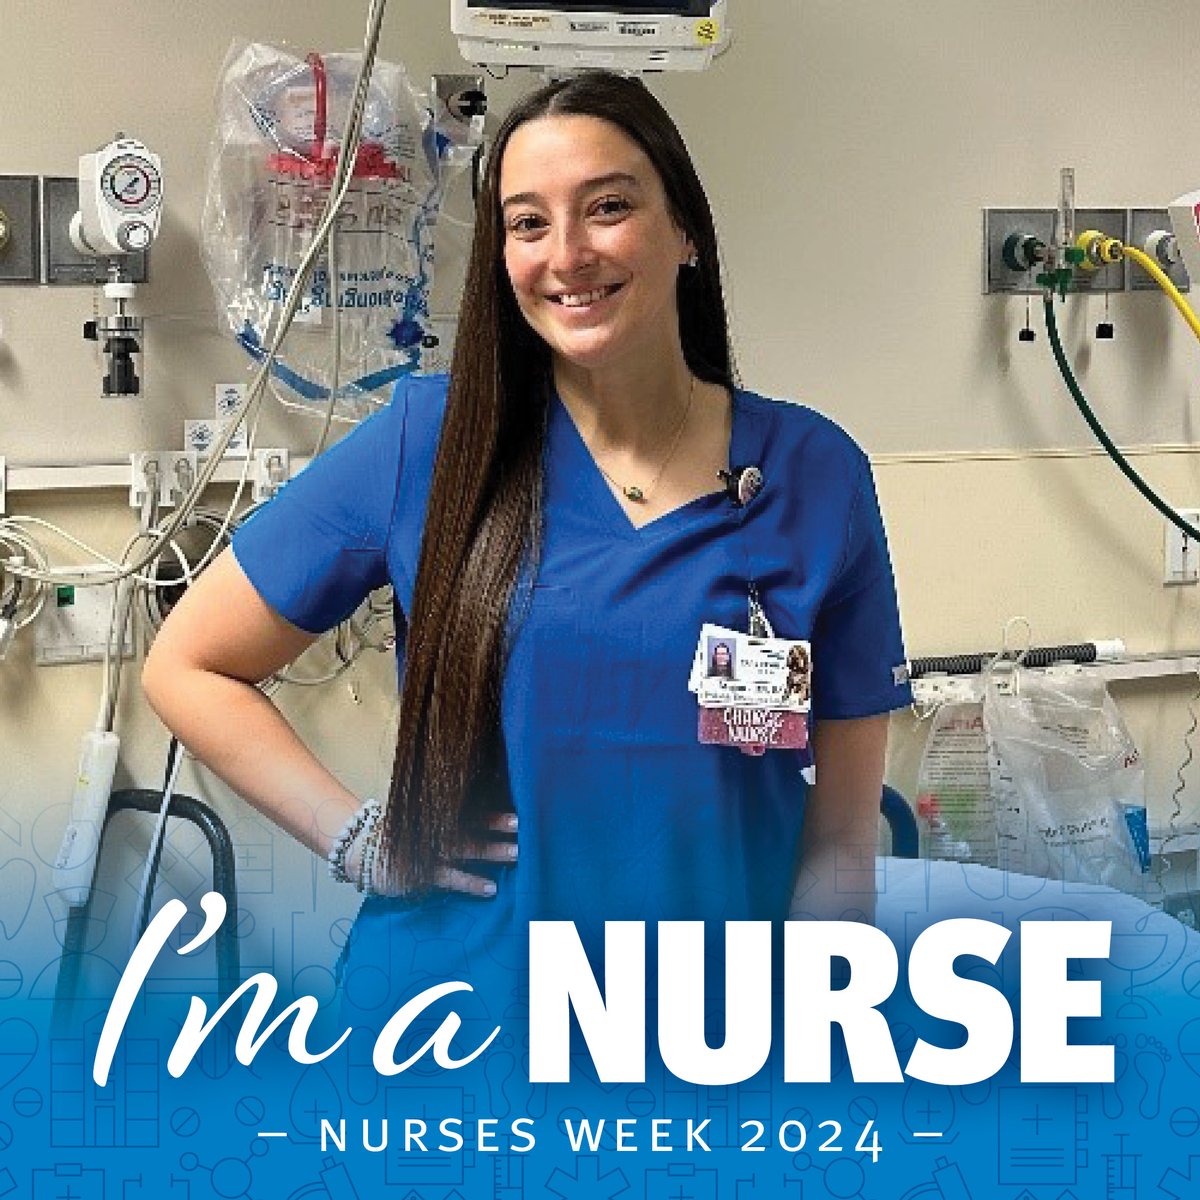 Megan Blecke is a Charge Nurse in Cape Fear Valley Children’s Emergency Department. 'We treat very sick kids and see the immediate response of our interventions. I love seeing how resilient children are and how they always have such a positive outlook on life.” #NursesWeek